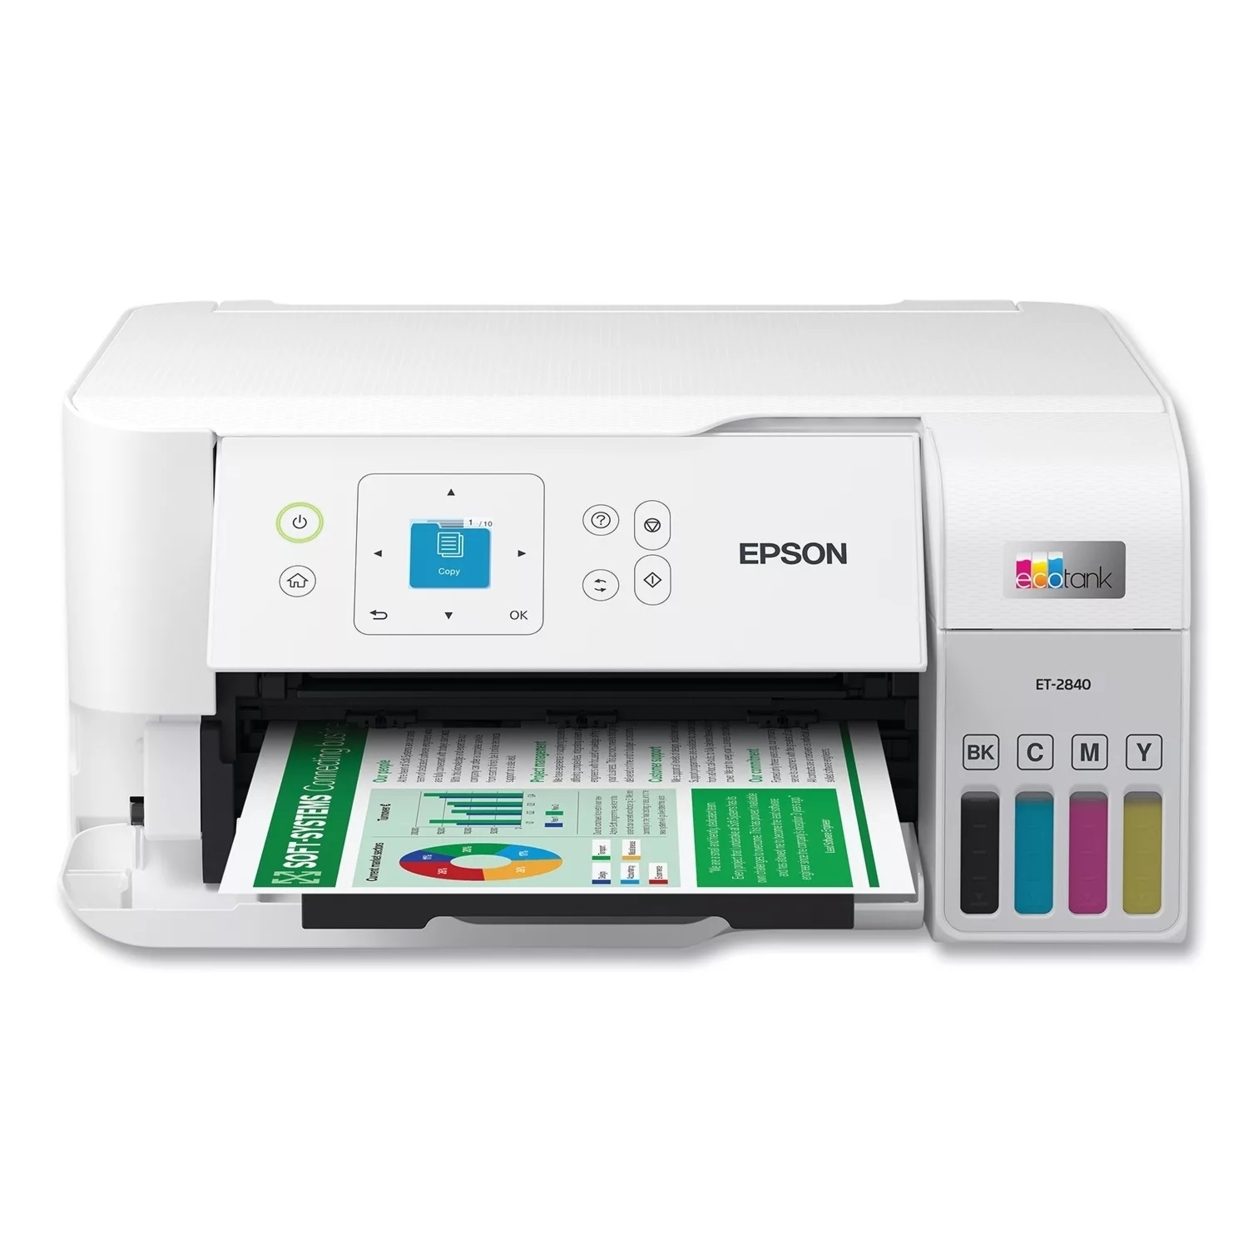 Epson EcoTank ET2840 Special Edition Wireless Color All-in-One Supertank Printer